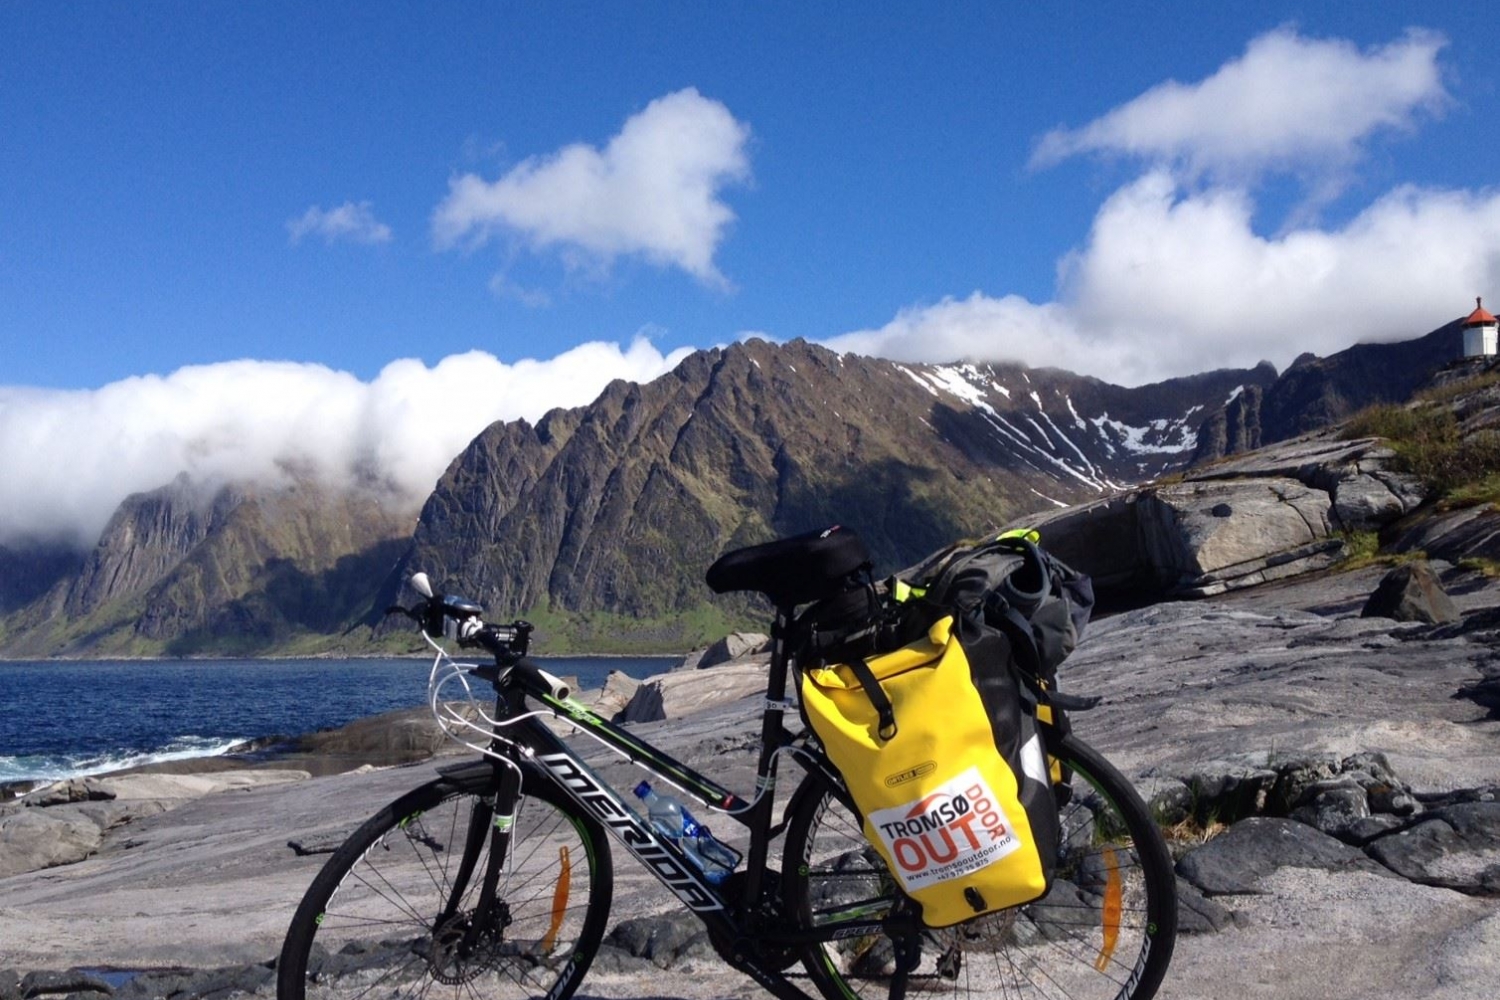 Hiking and biking along the scenic route at Skaland